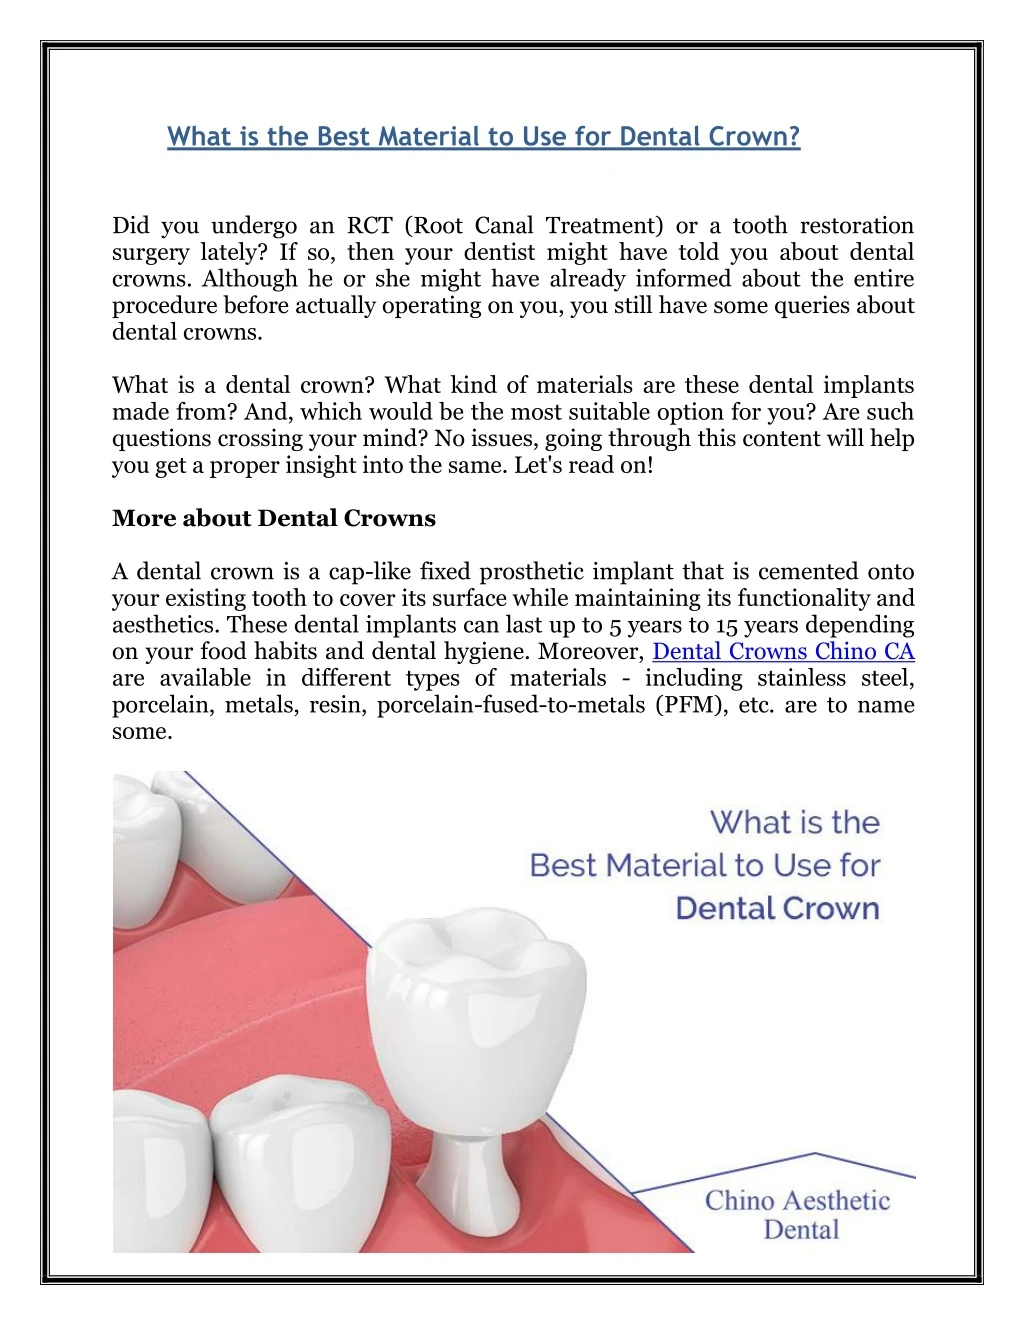 what is the best material to use for dental crown